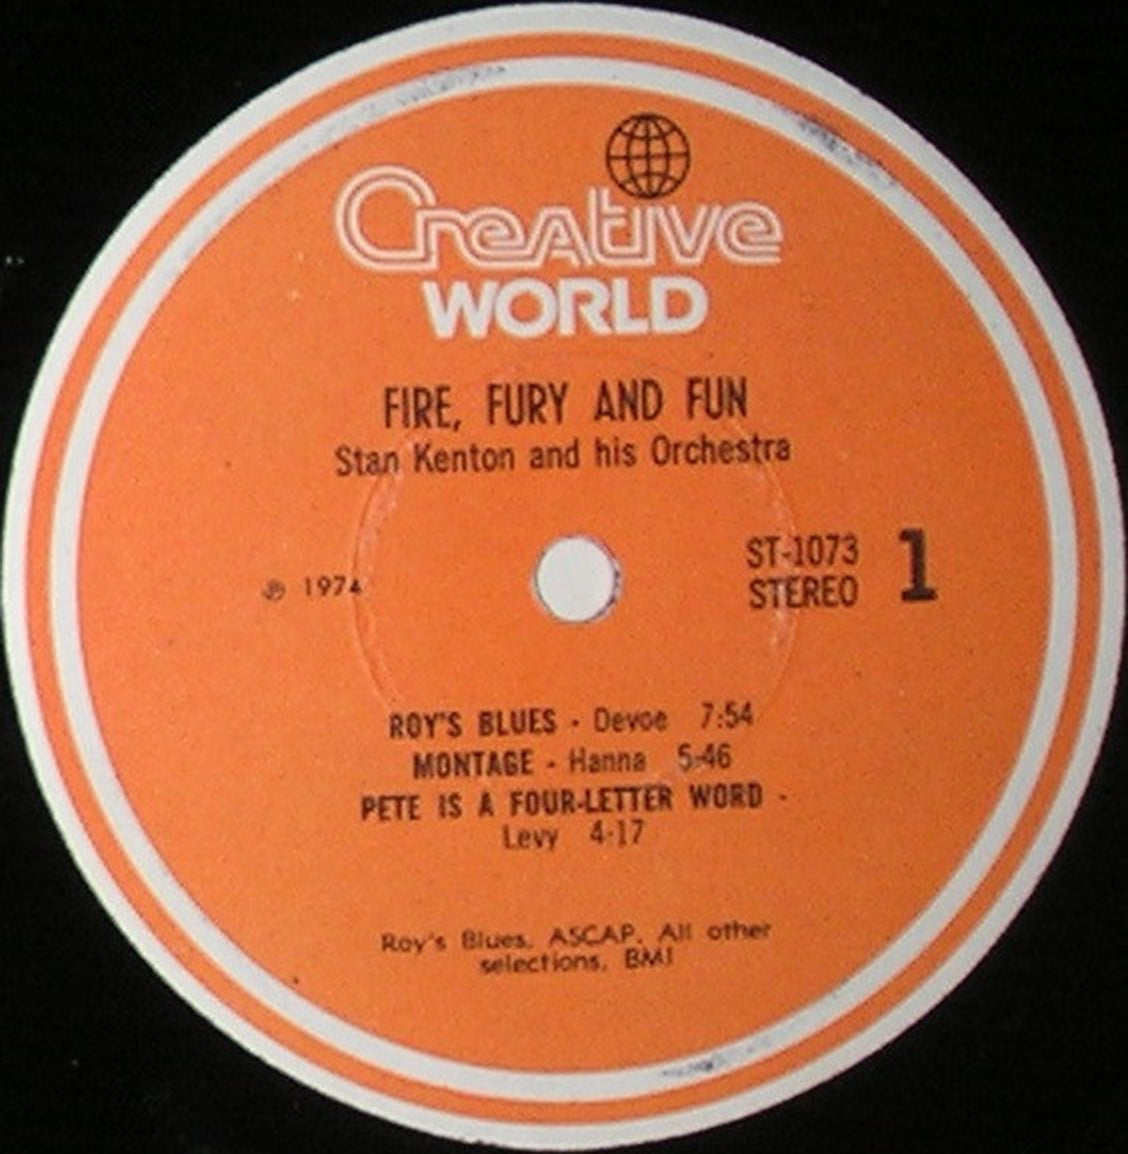 Stan Kenton And His Orchestra – Fire, Fury And Fun - 1974 US Pressing